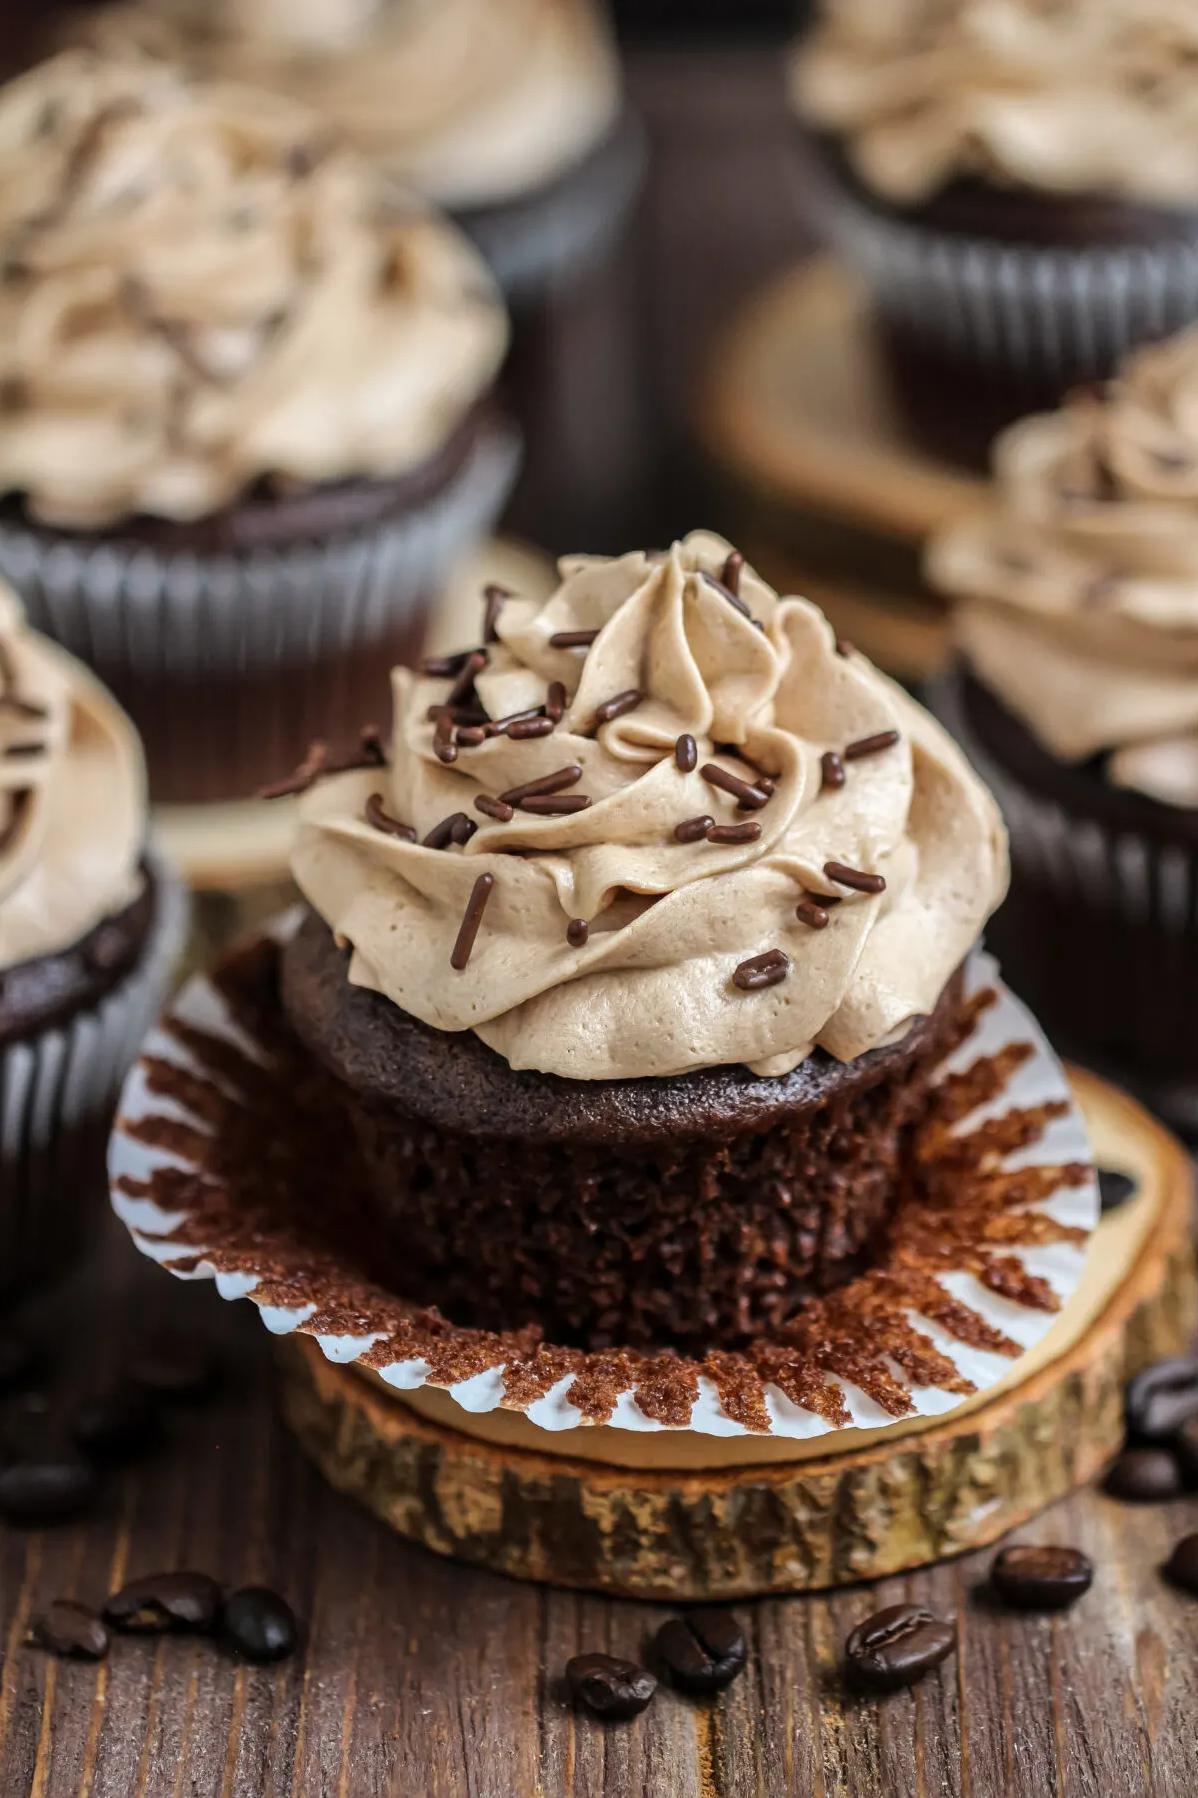  If you love mocha, this icing is your new best friend.